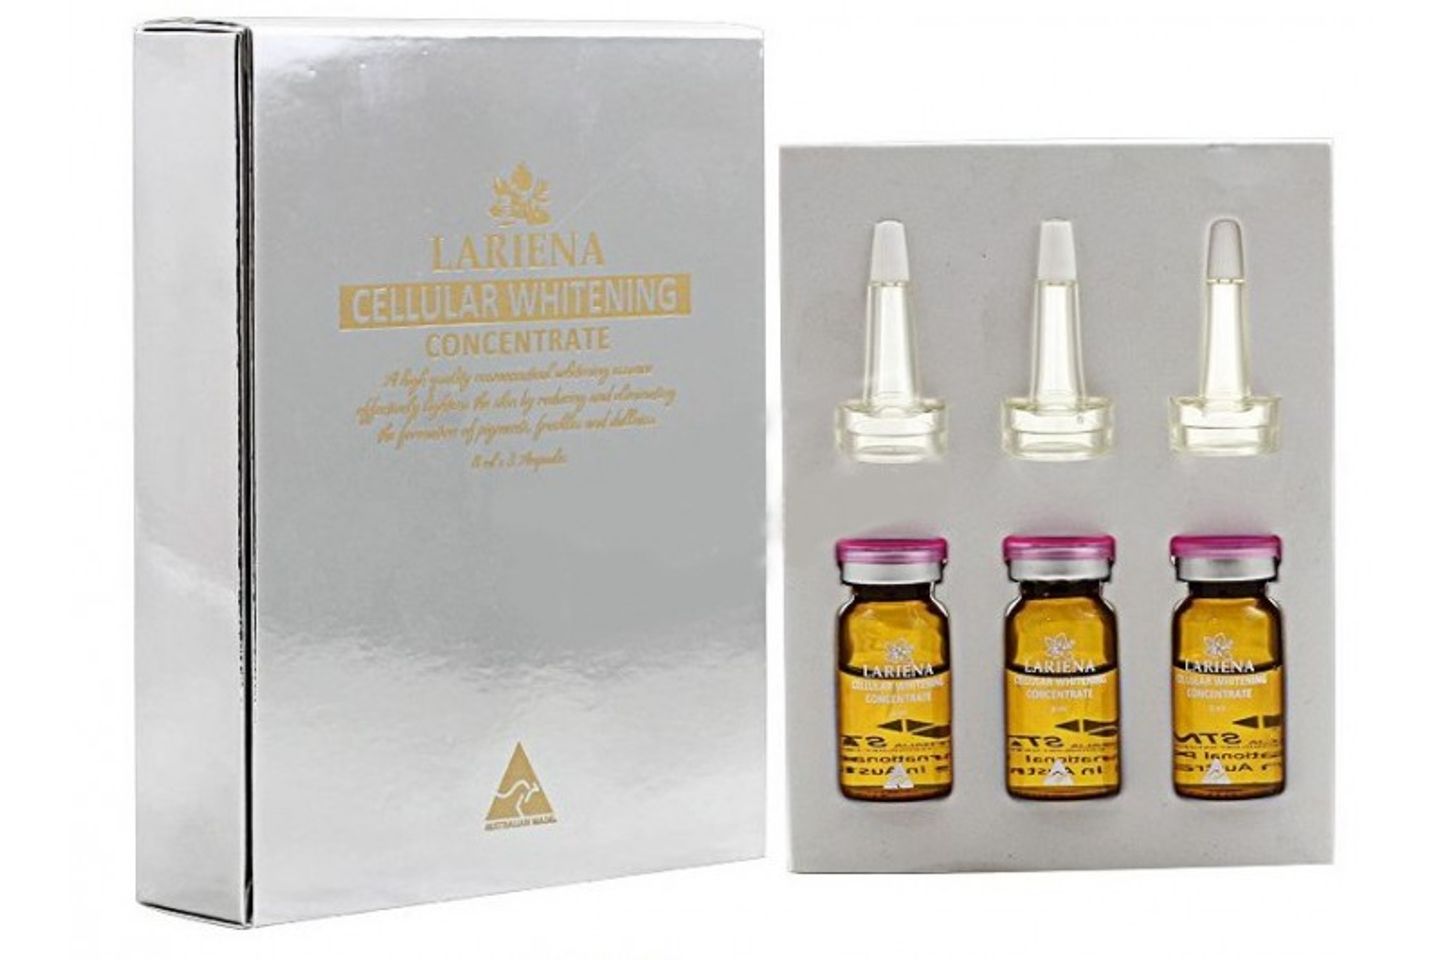 Tinh Chất Trắng Da Lariena Cellular Whitening Concentrate 1